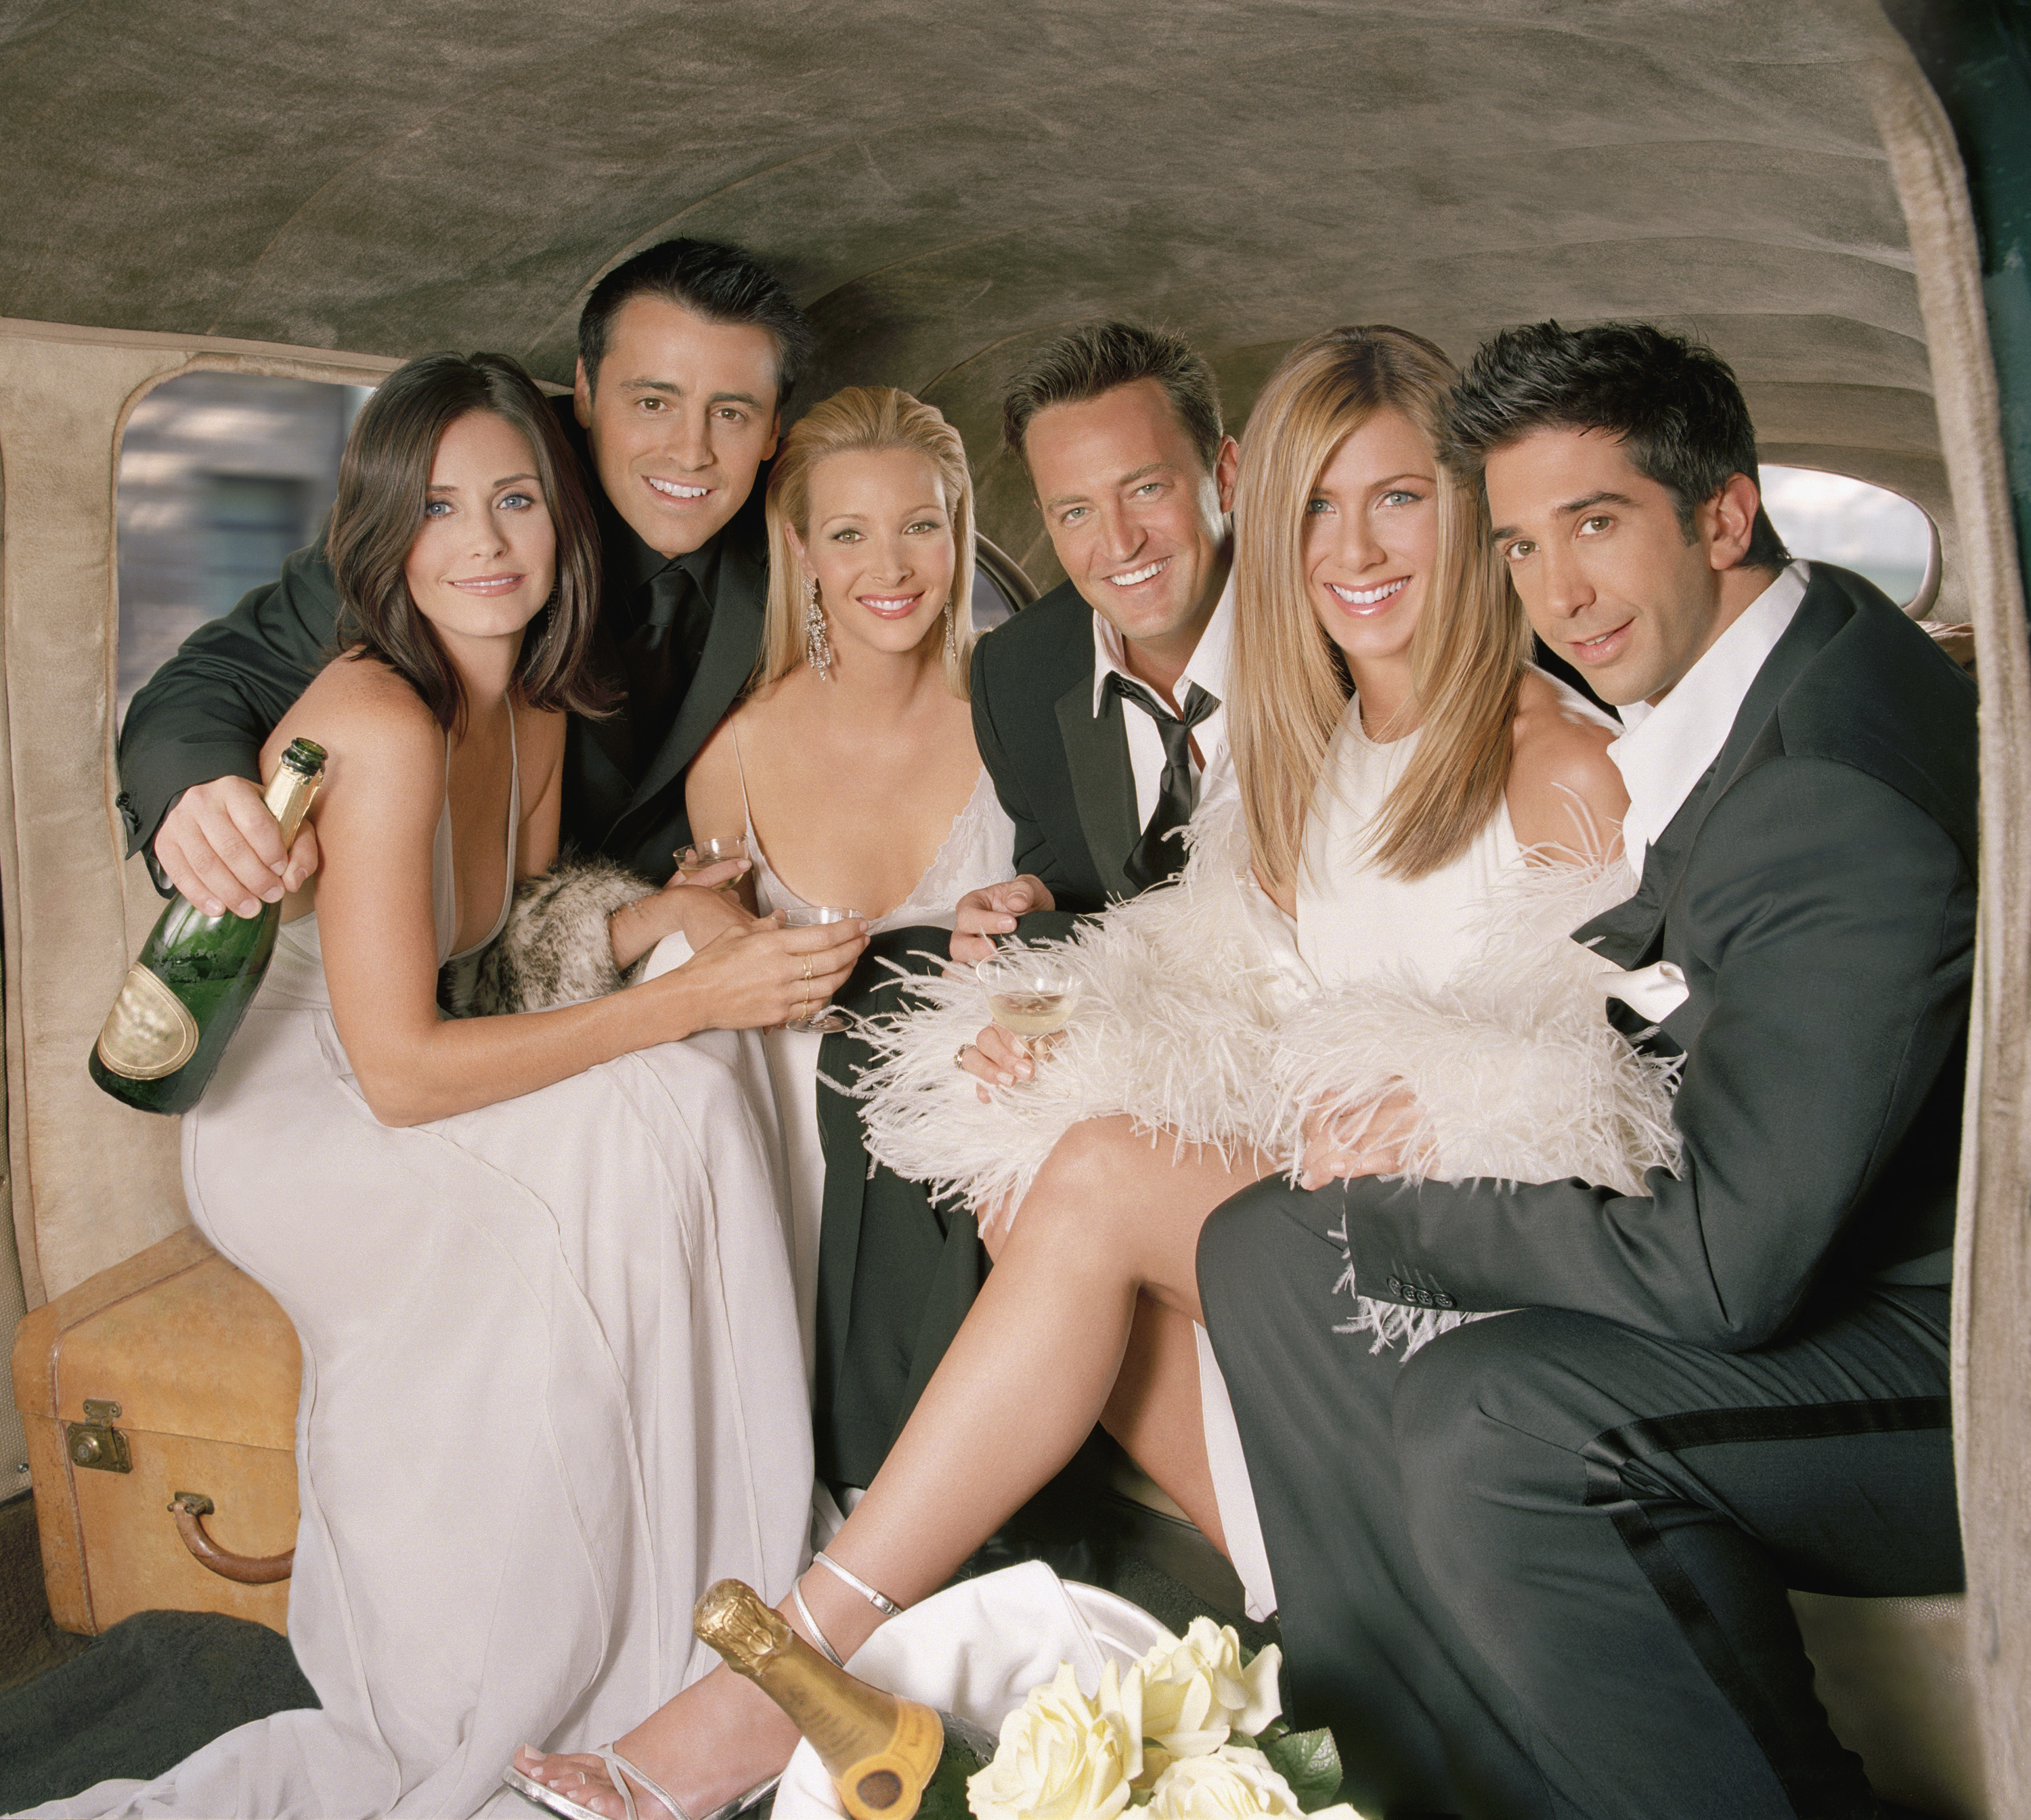 The cast sitting together and holding champagne in a scene from the show